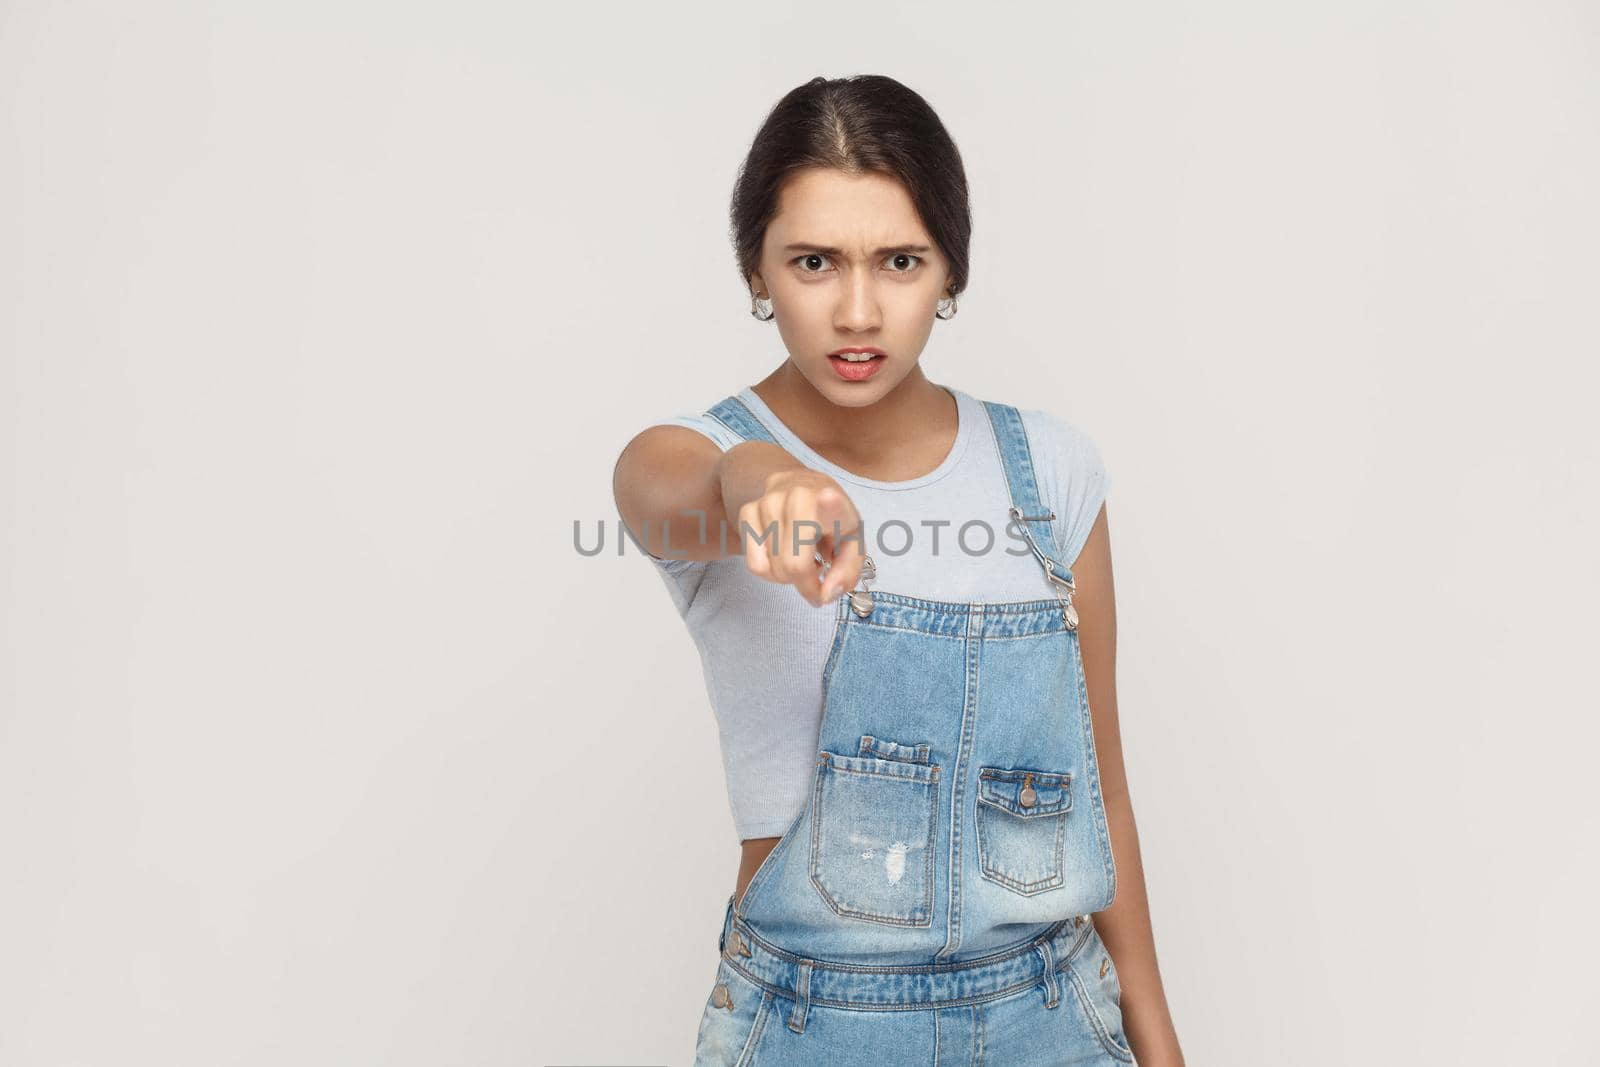 Angry latin woman with denim overalls looking at camera and pointing finger. Studio shot isolated on gray background.